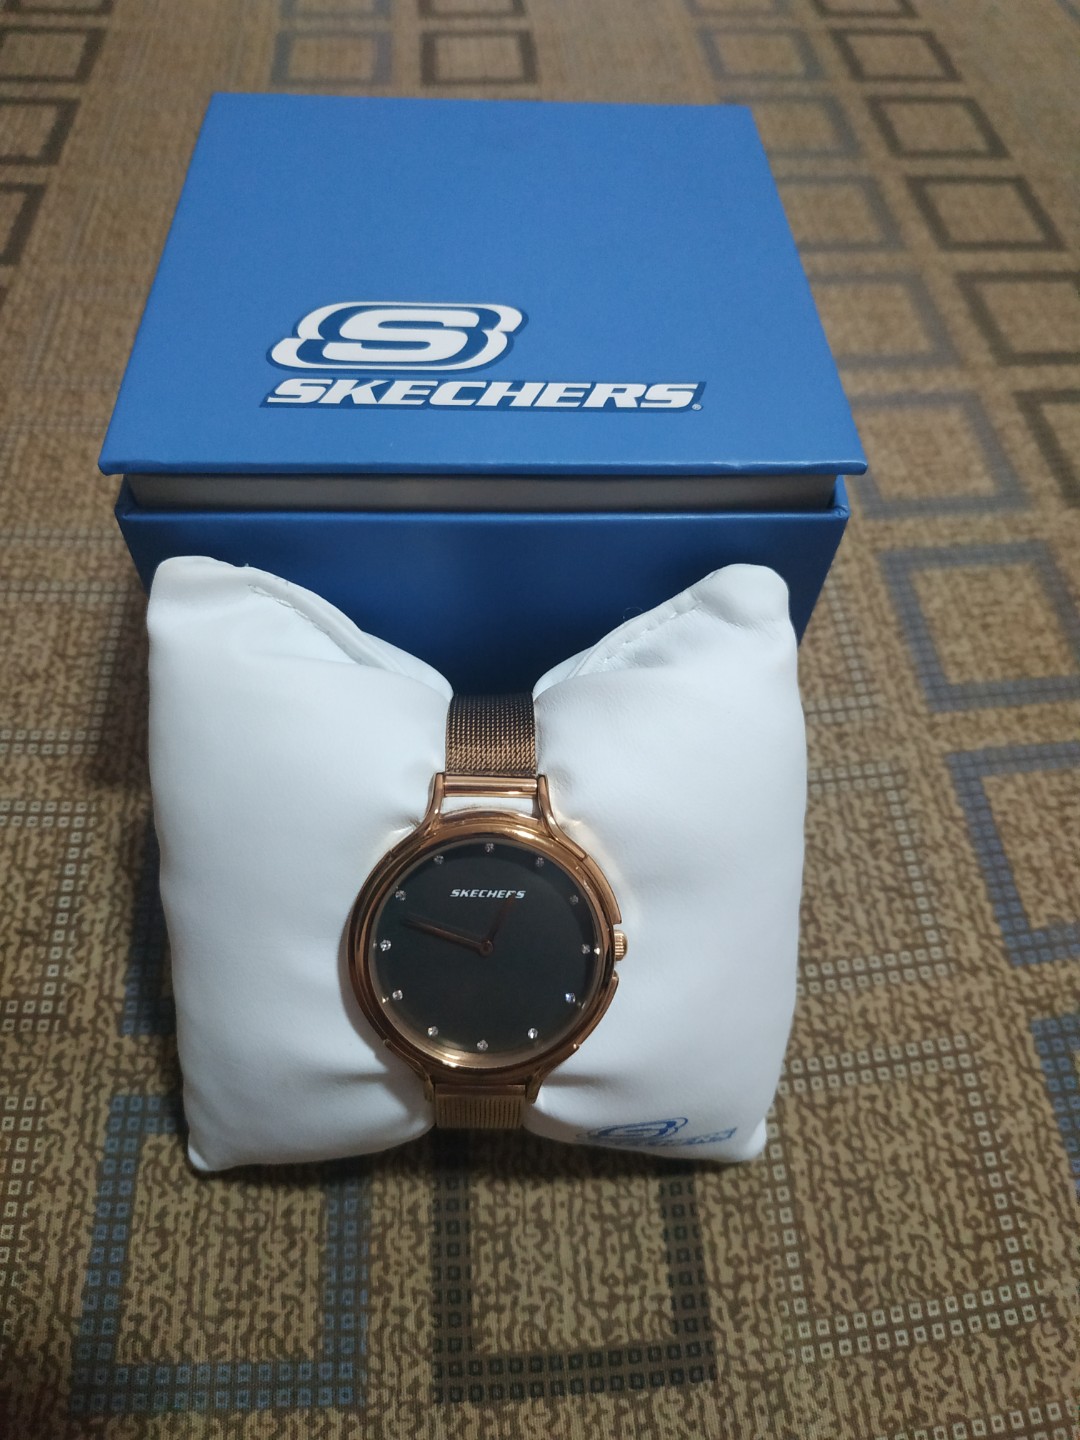 how to change time on skechers watch